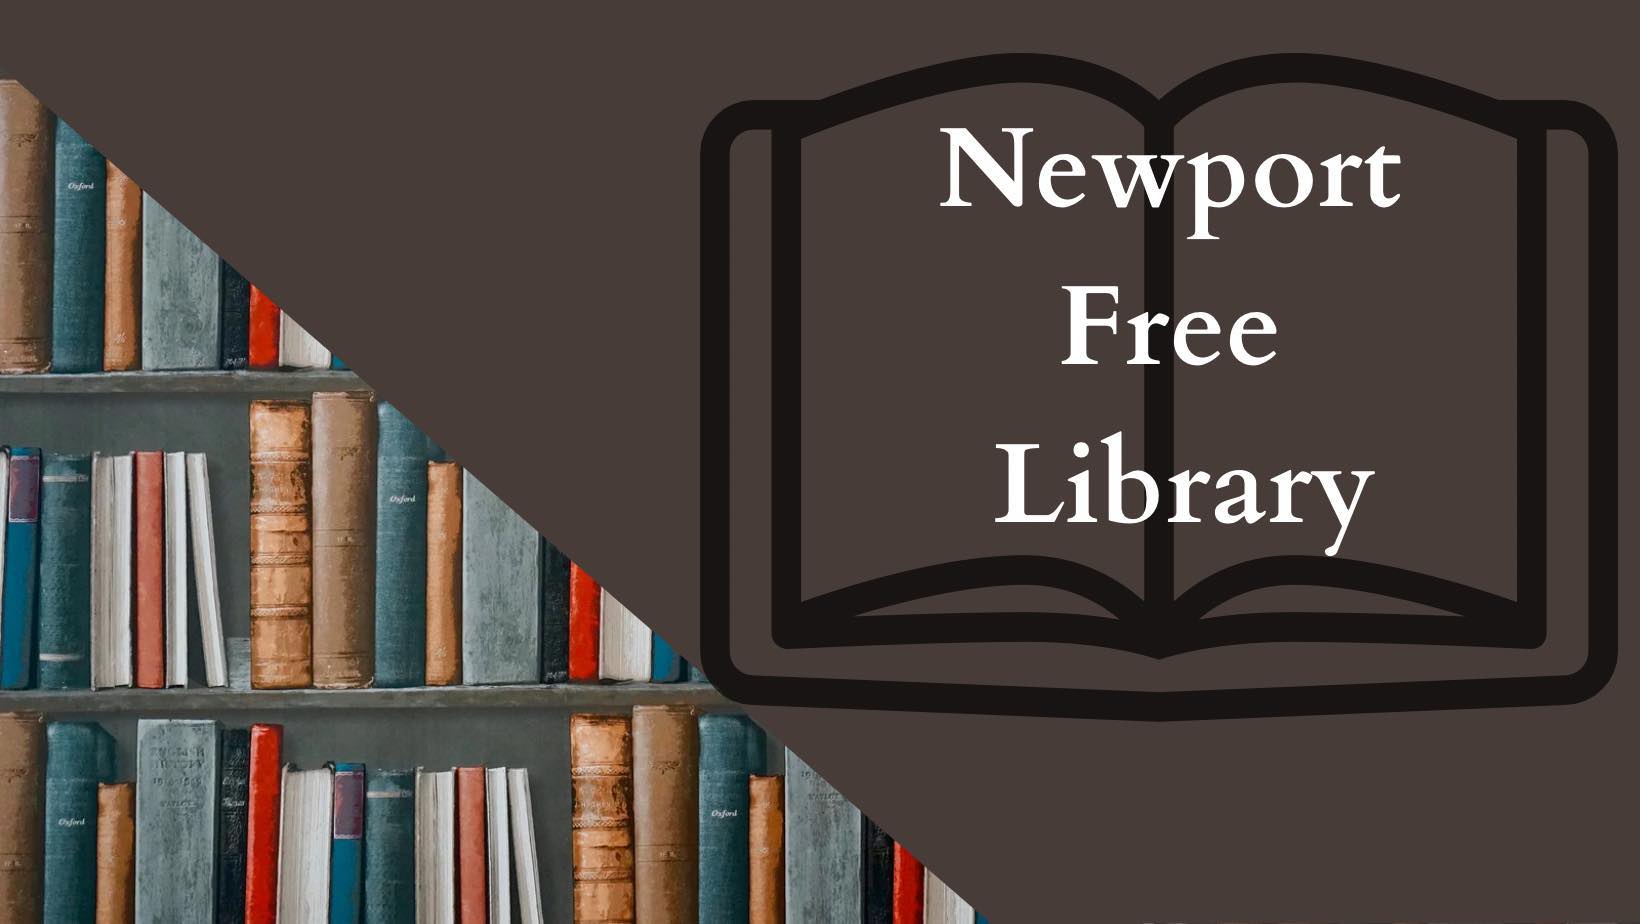 Newport Free Library